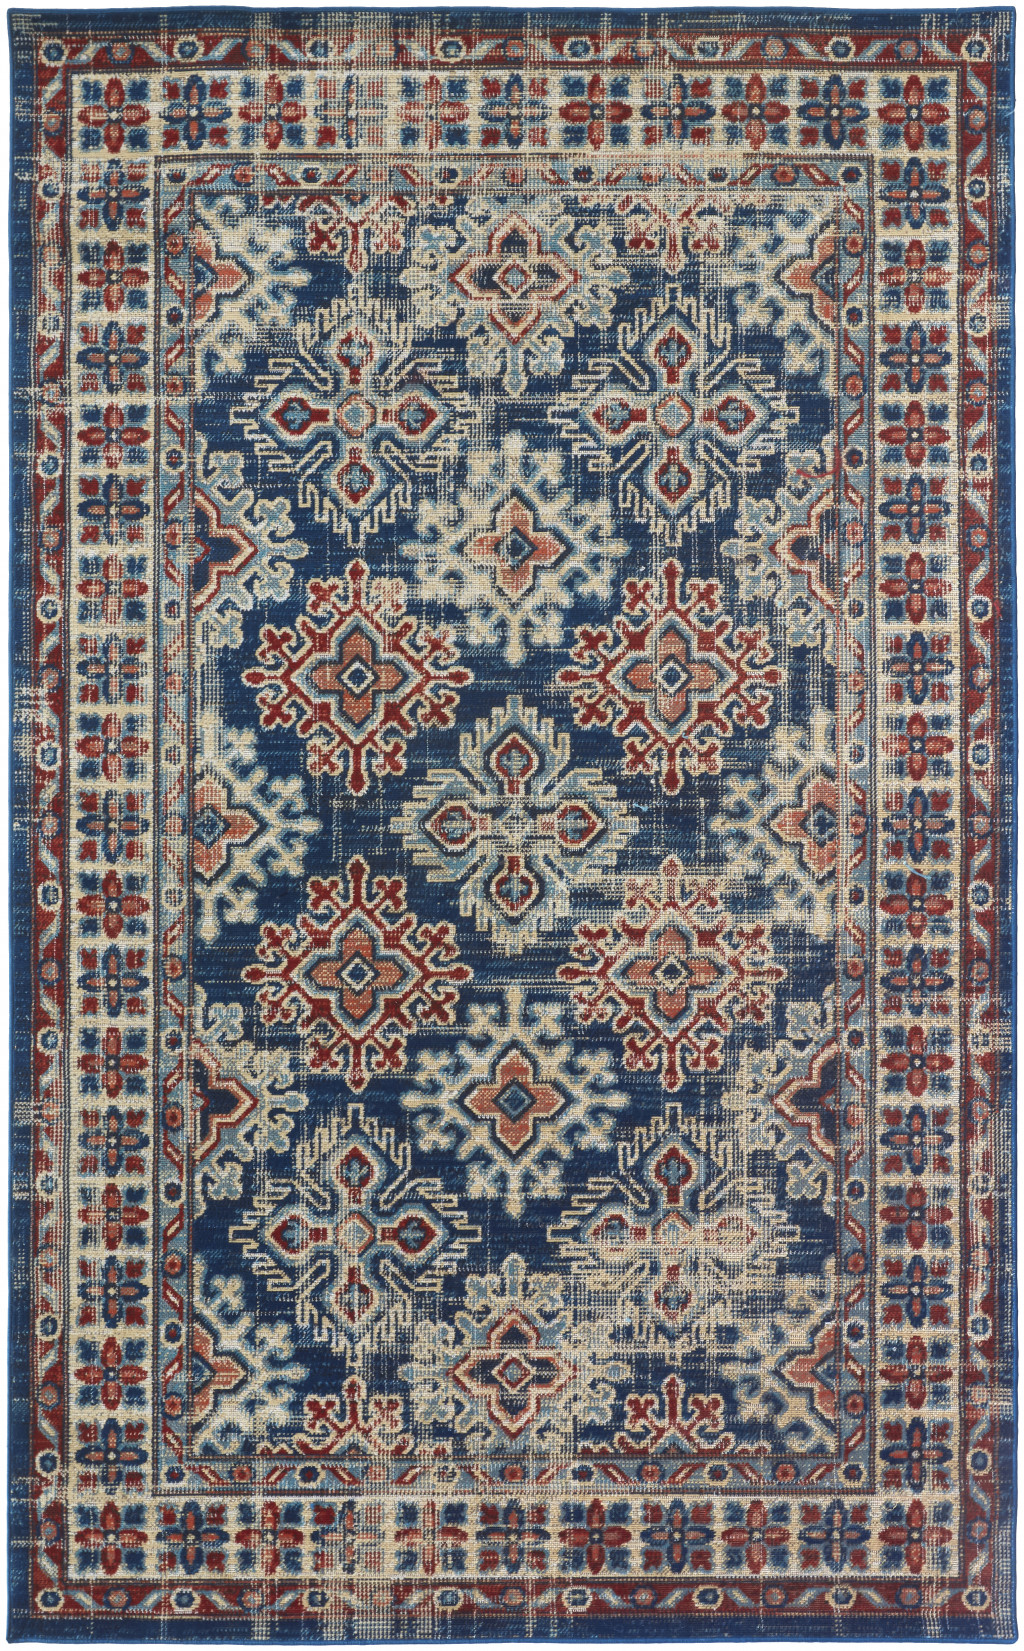 10' X 13' Blue Red And Ivory Abstract Power Loom Distressed Stain Resistant Area Rug-514663-1